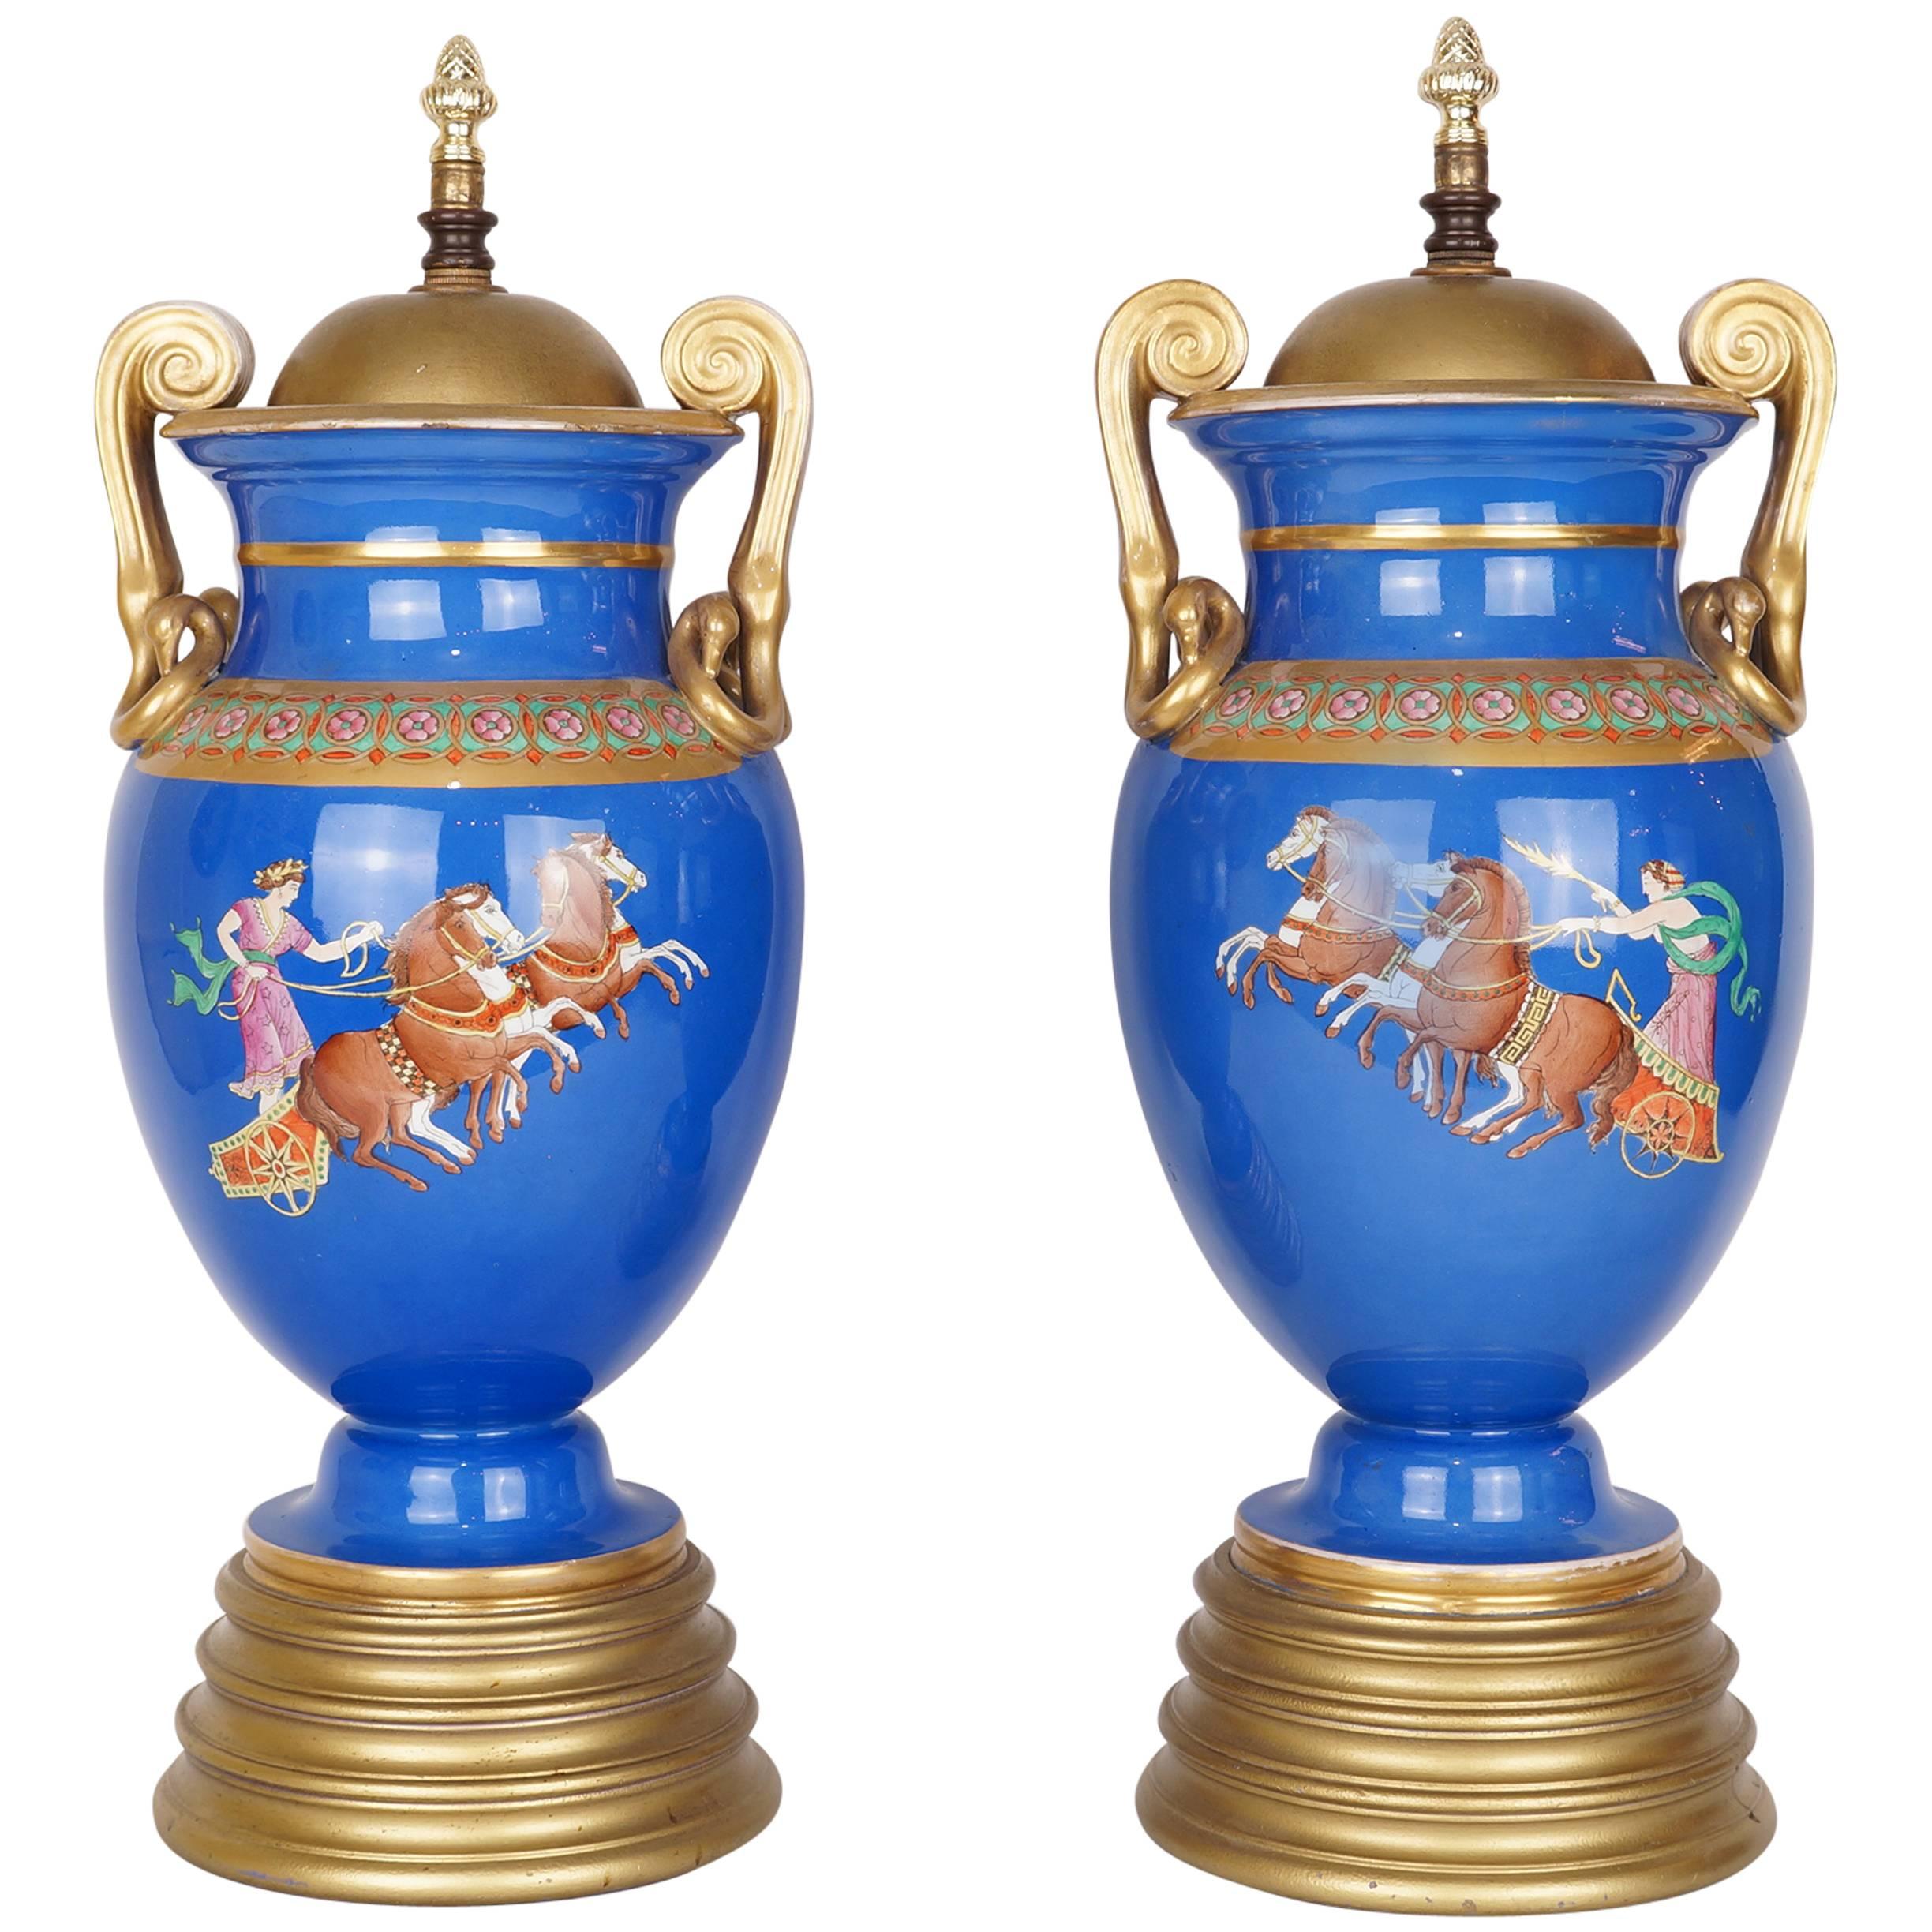 Pair of Neoclassical Painted Blue Porcelain Lamp Bases with Chariots Scenes